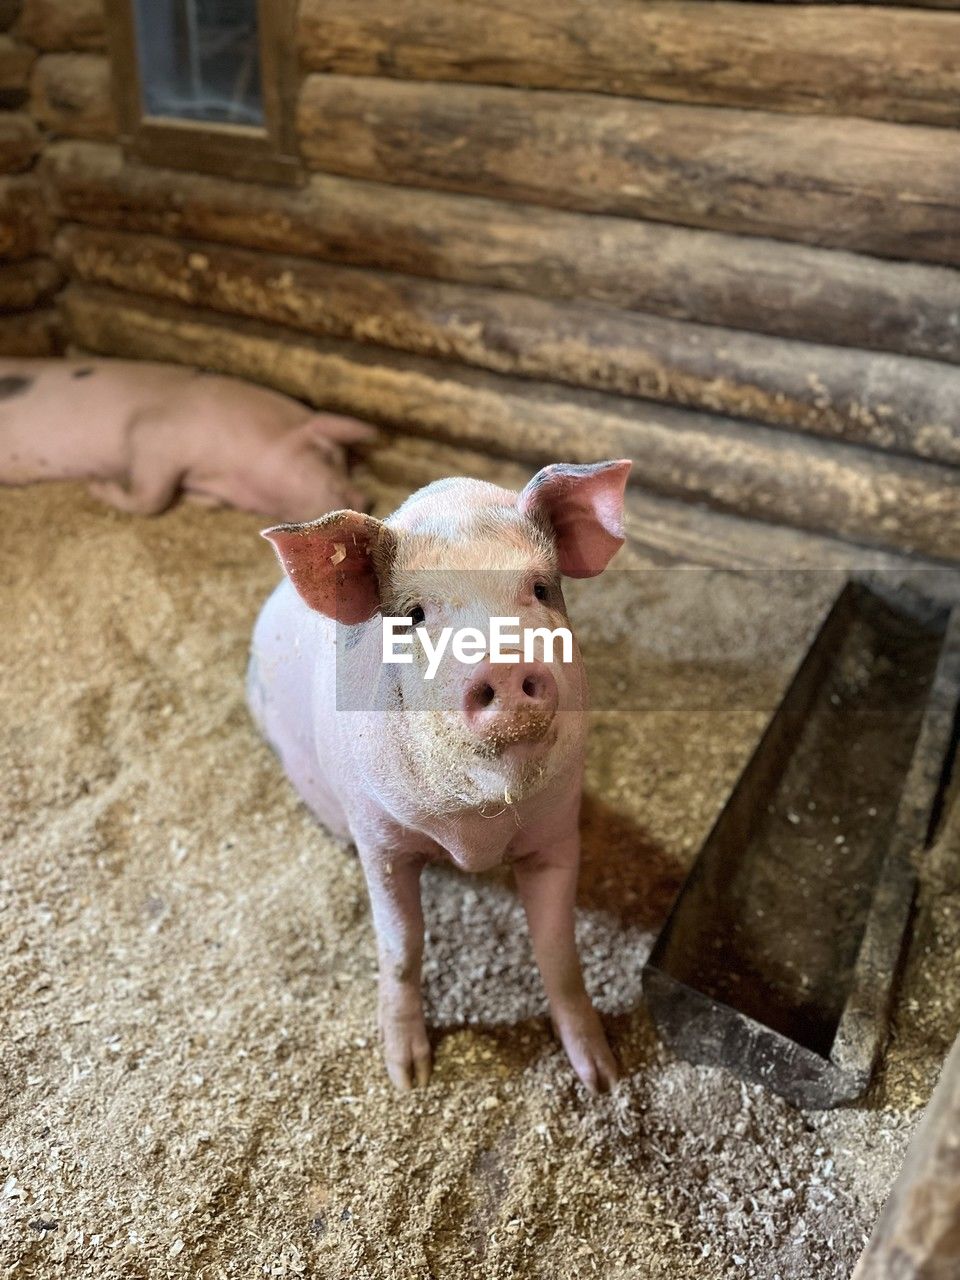 mammal, animal themes, animal, domestic animals, domestic pig, pet, pig, livestock, farm, one animal, agriculture, portrait, standing, rural scene, looking at camera, piglet, agricultural building, day, nature, no people, barn, young animal, outdoors, landscape, architecture, high angle view